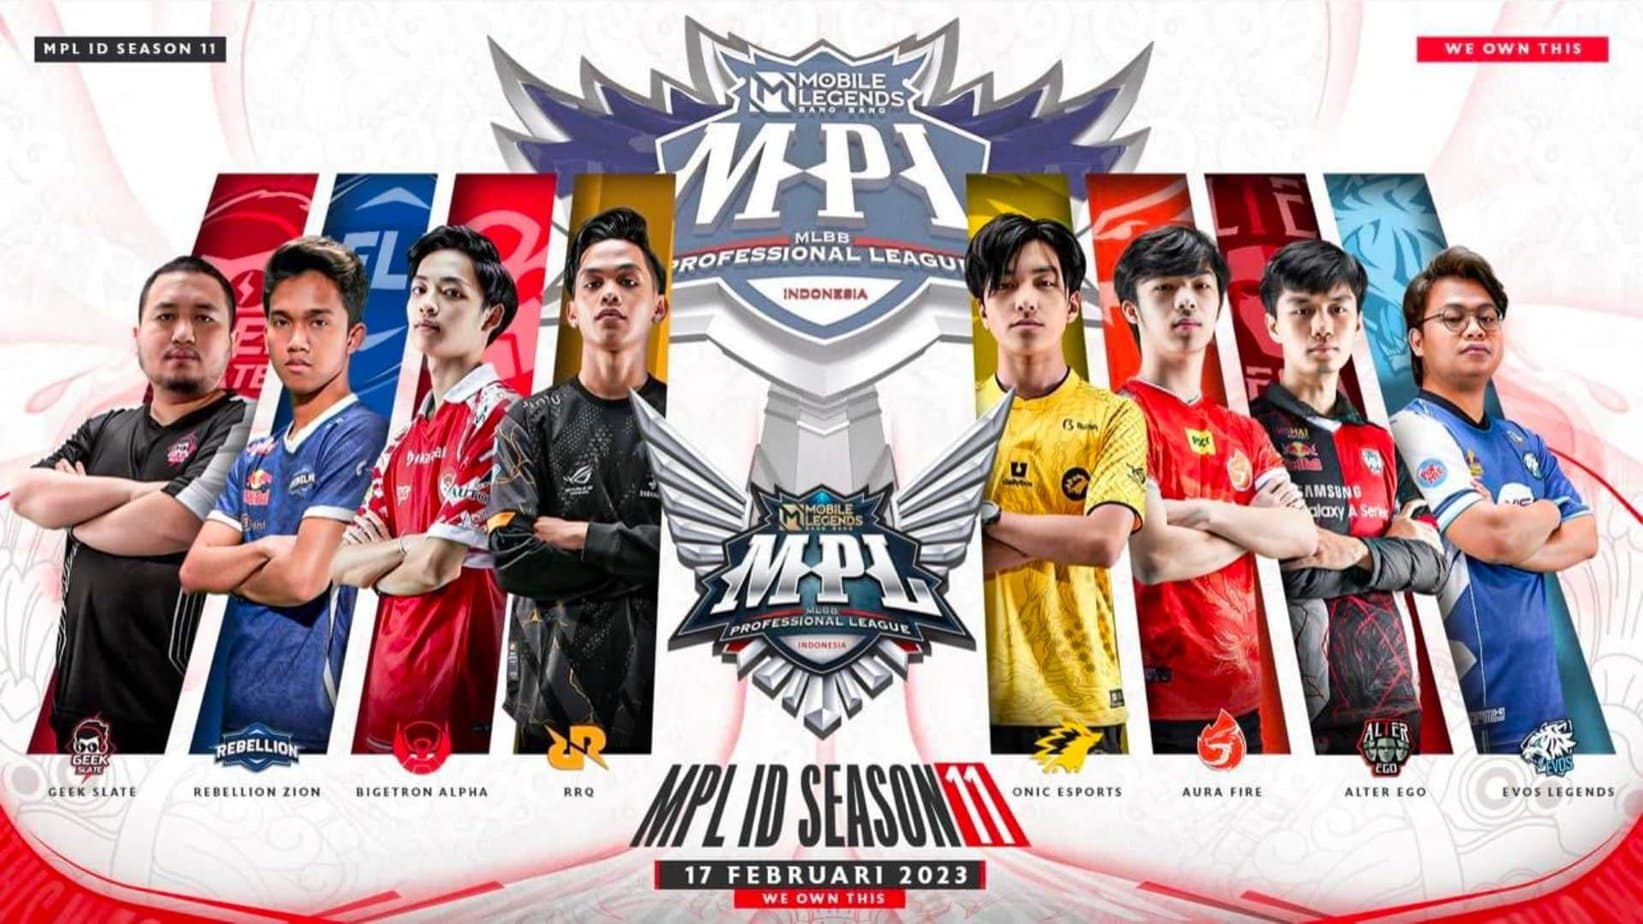 8 Team Jerseys for MPL ID Season 11, Which is the Best?